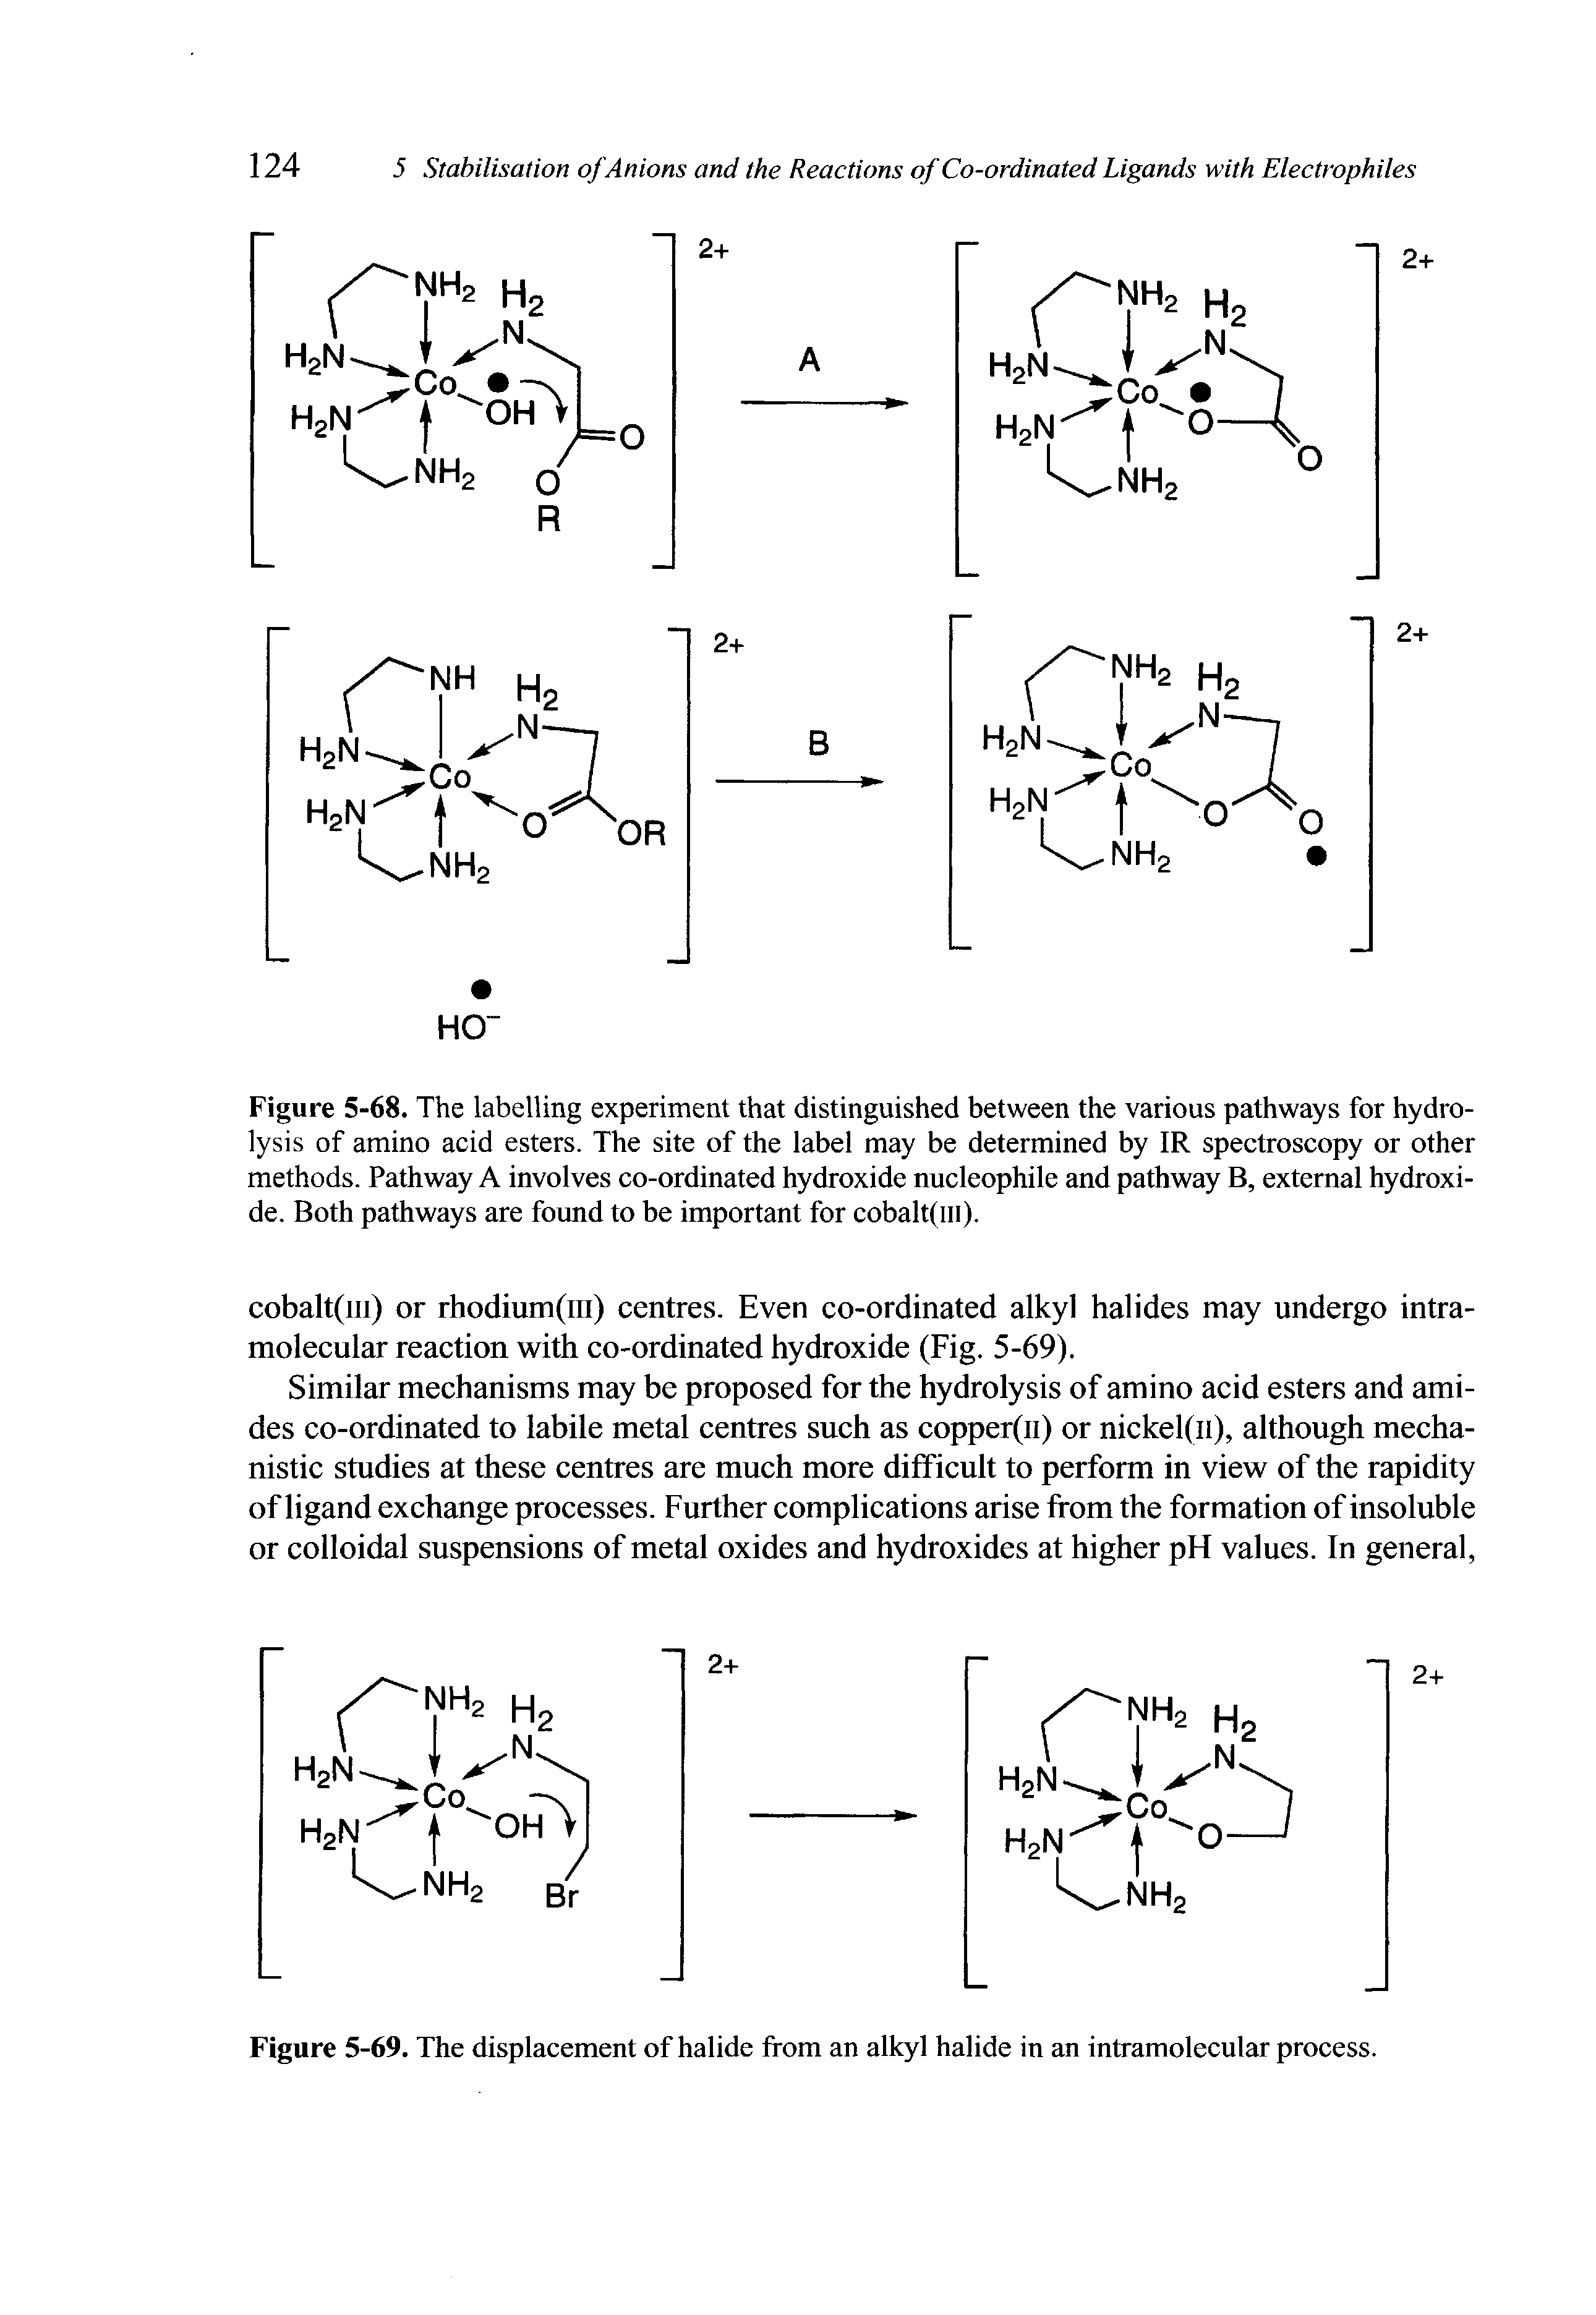 Figure 5-68. The labelling experiment that distinguished between the various pathways for hydrolysis of amino acid esters. The site of the label may be determined by IR spectroscopy or other methods. Pathway A involves co-ordinated hydroxide nucleophile and pathway B, external hydroxide. Both pathways are found to be important for cobalt(m).